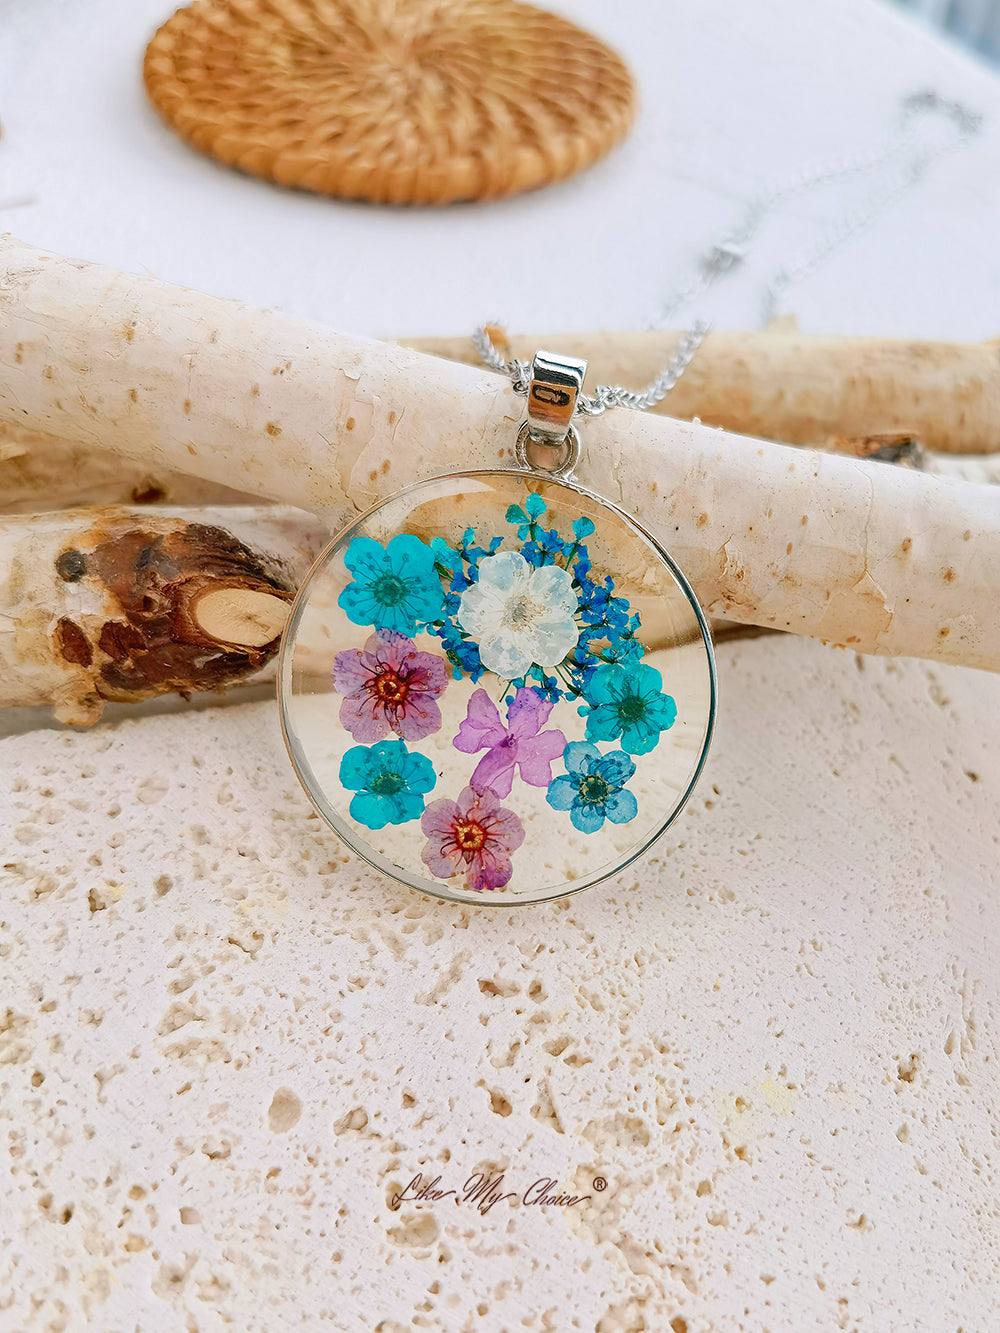 Forget me not Queen Anne Lace Pressed Flower Necklace